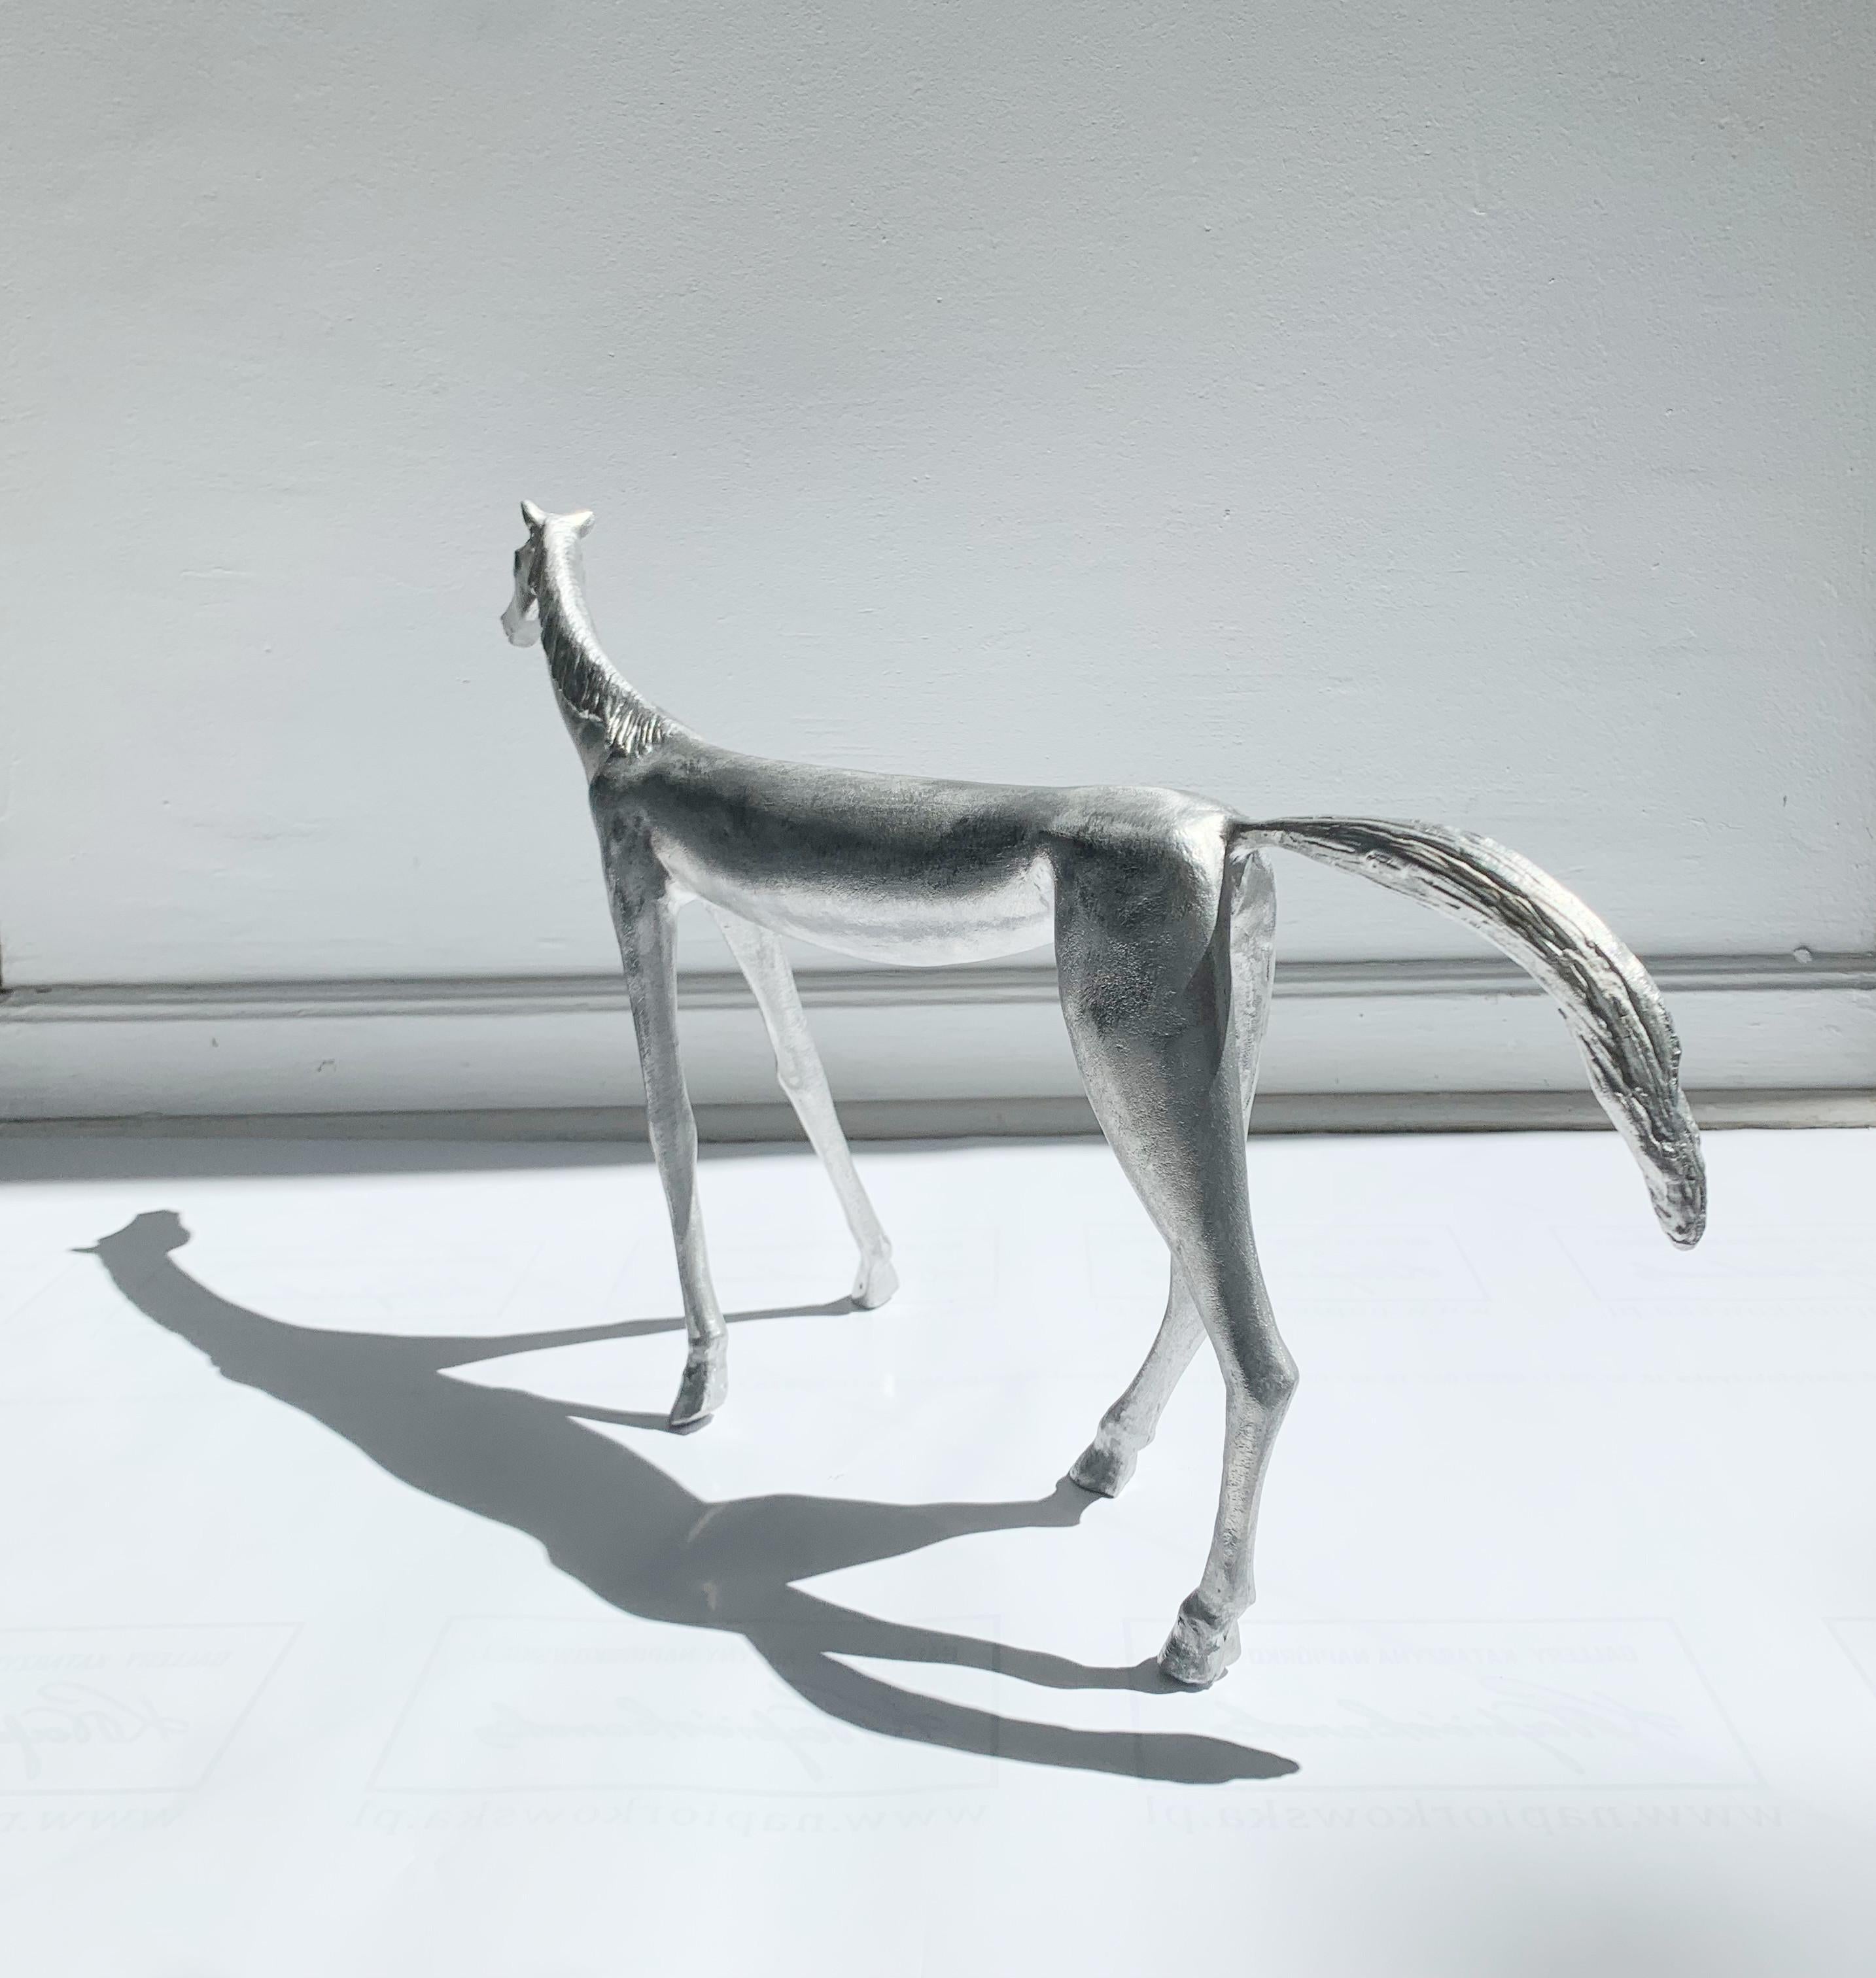 Contemporary figurative aluminium sculpture by Italian artist Antonio Giancaterino. Sculpture depicts a horse shown in artistic proportions. 

ANTONIO GIANCATERINO
He graduated in 1972 from the Academy of Fine Arts in Venice. He received the award